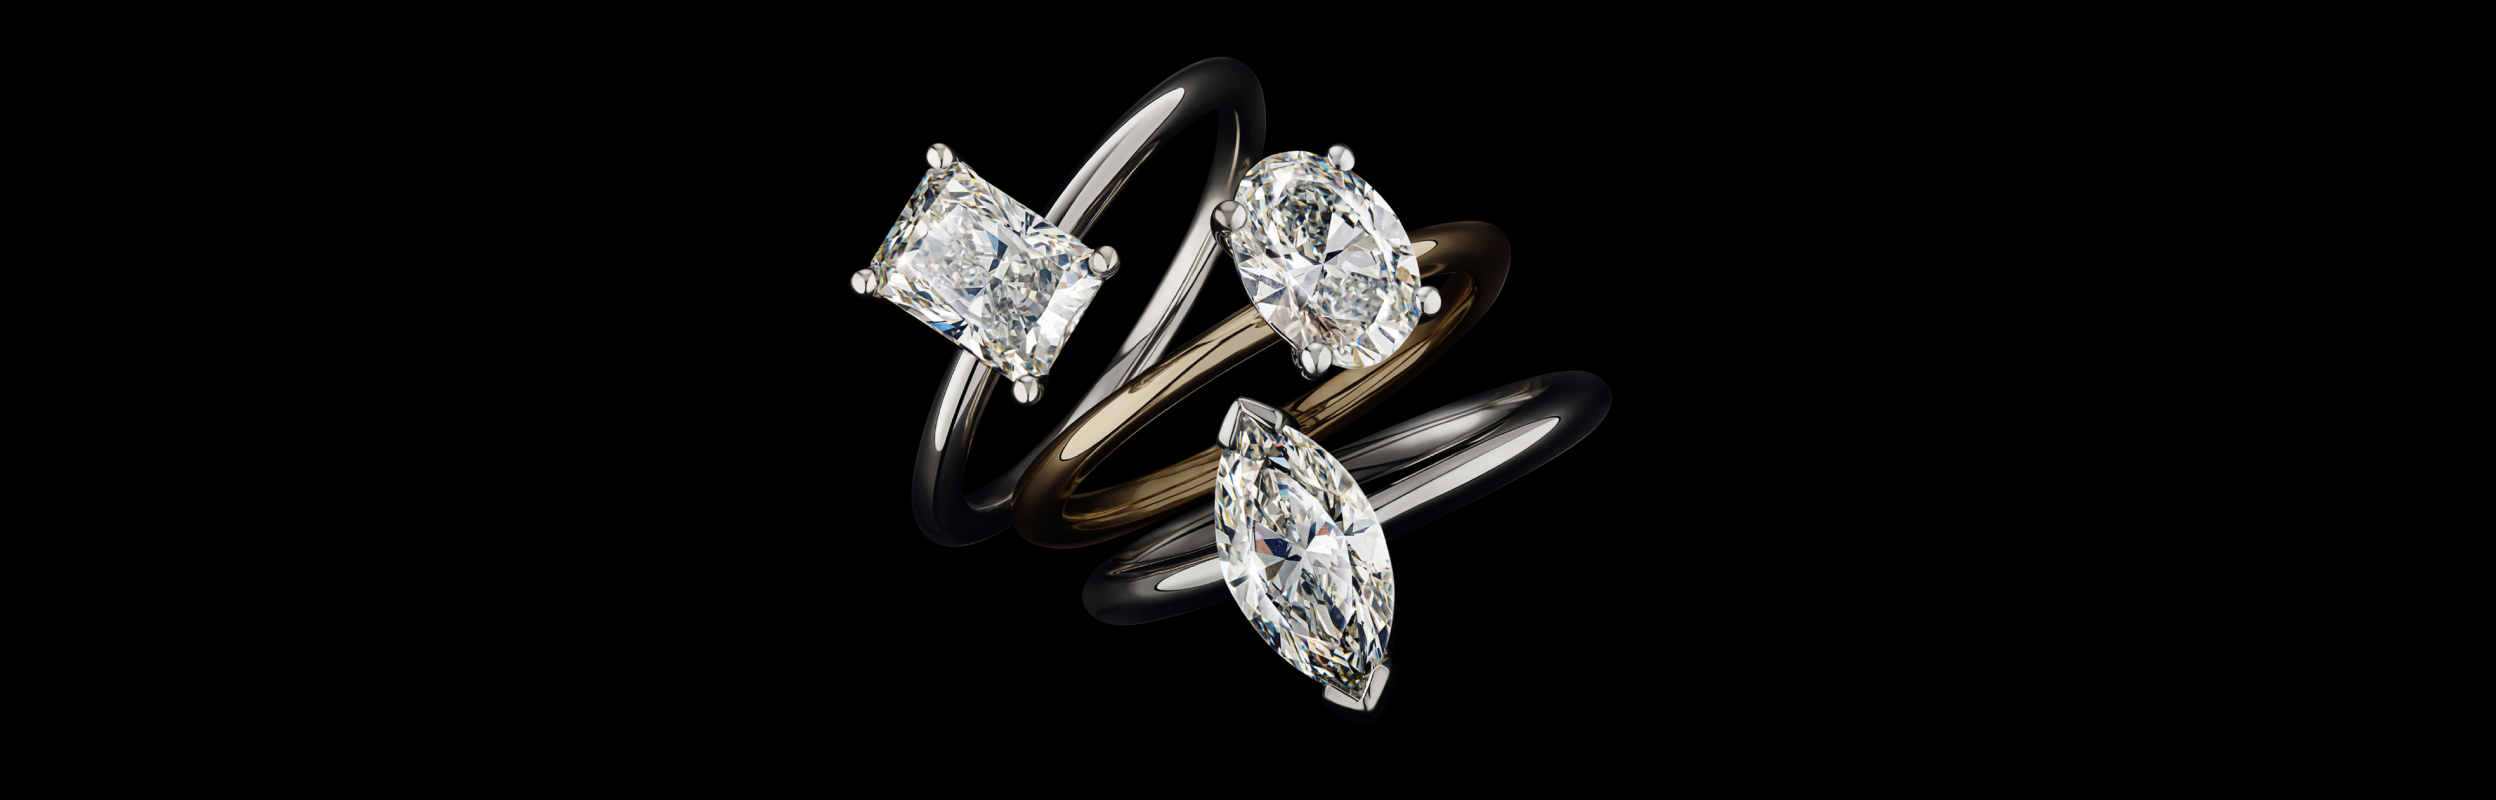 3 Laboratory Grown Diamond Engagement Rings in white and yellow gold stacked